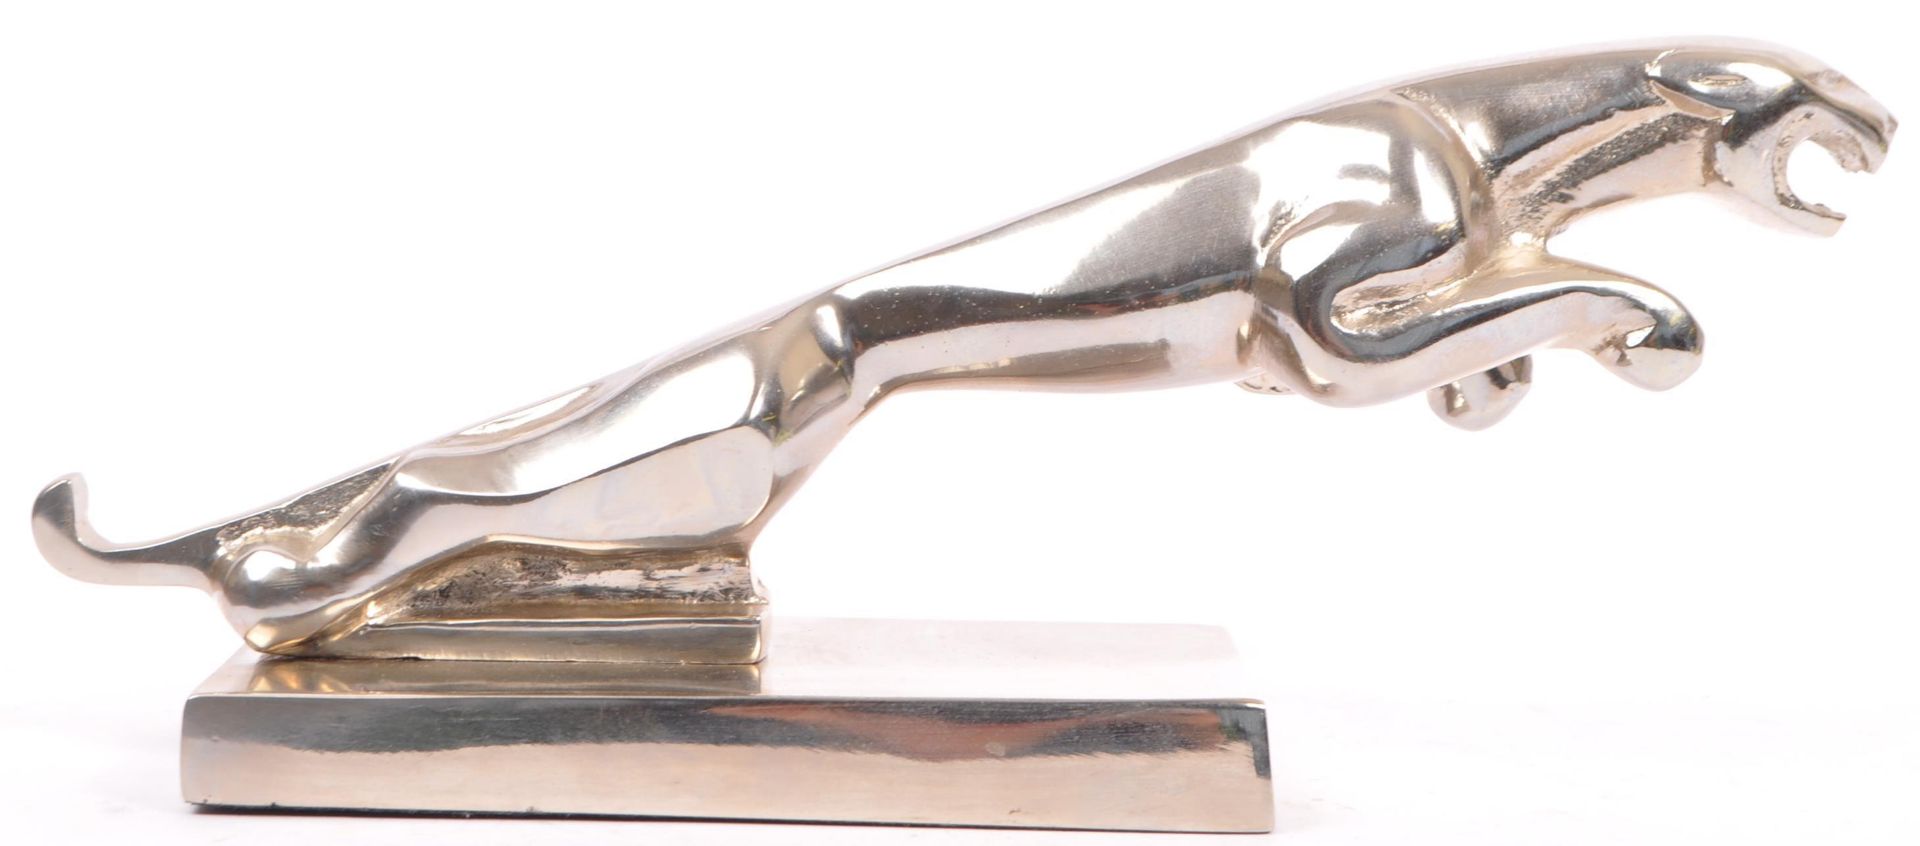 Automobillia Interest - A 20th century Jaguar chromed metal car mascot modelled in the form of a - Image 3 of 5